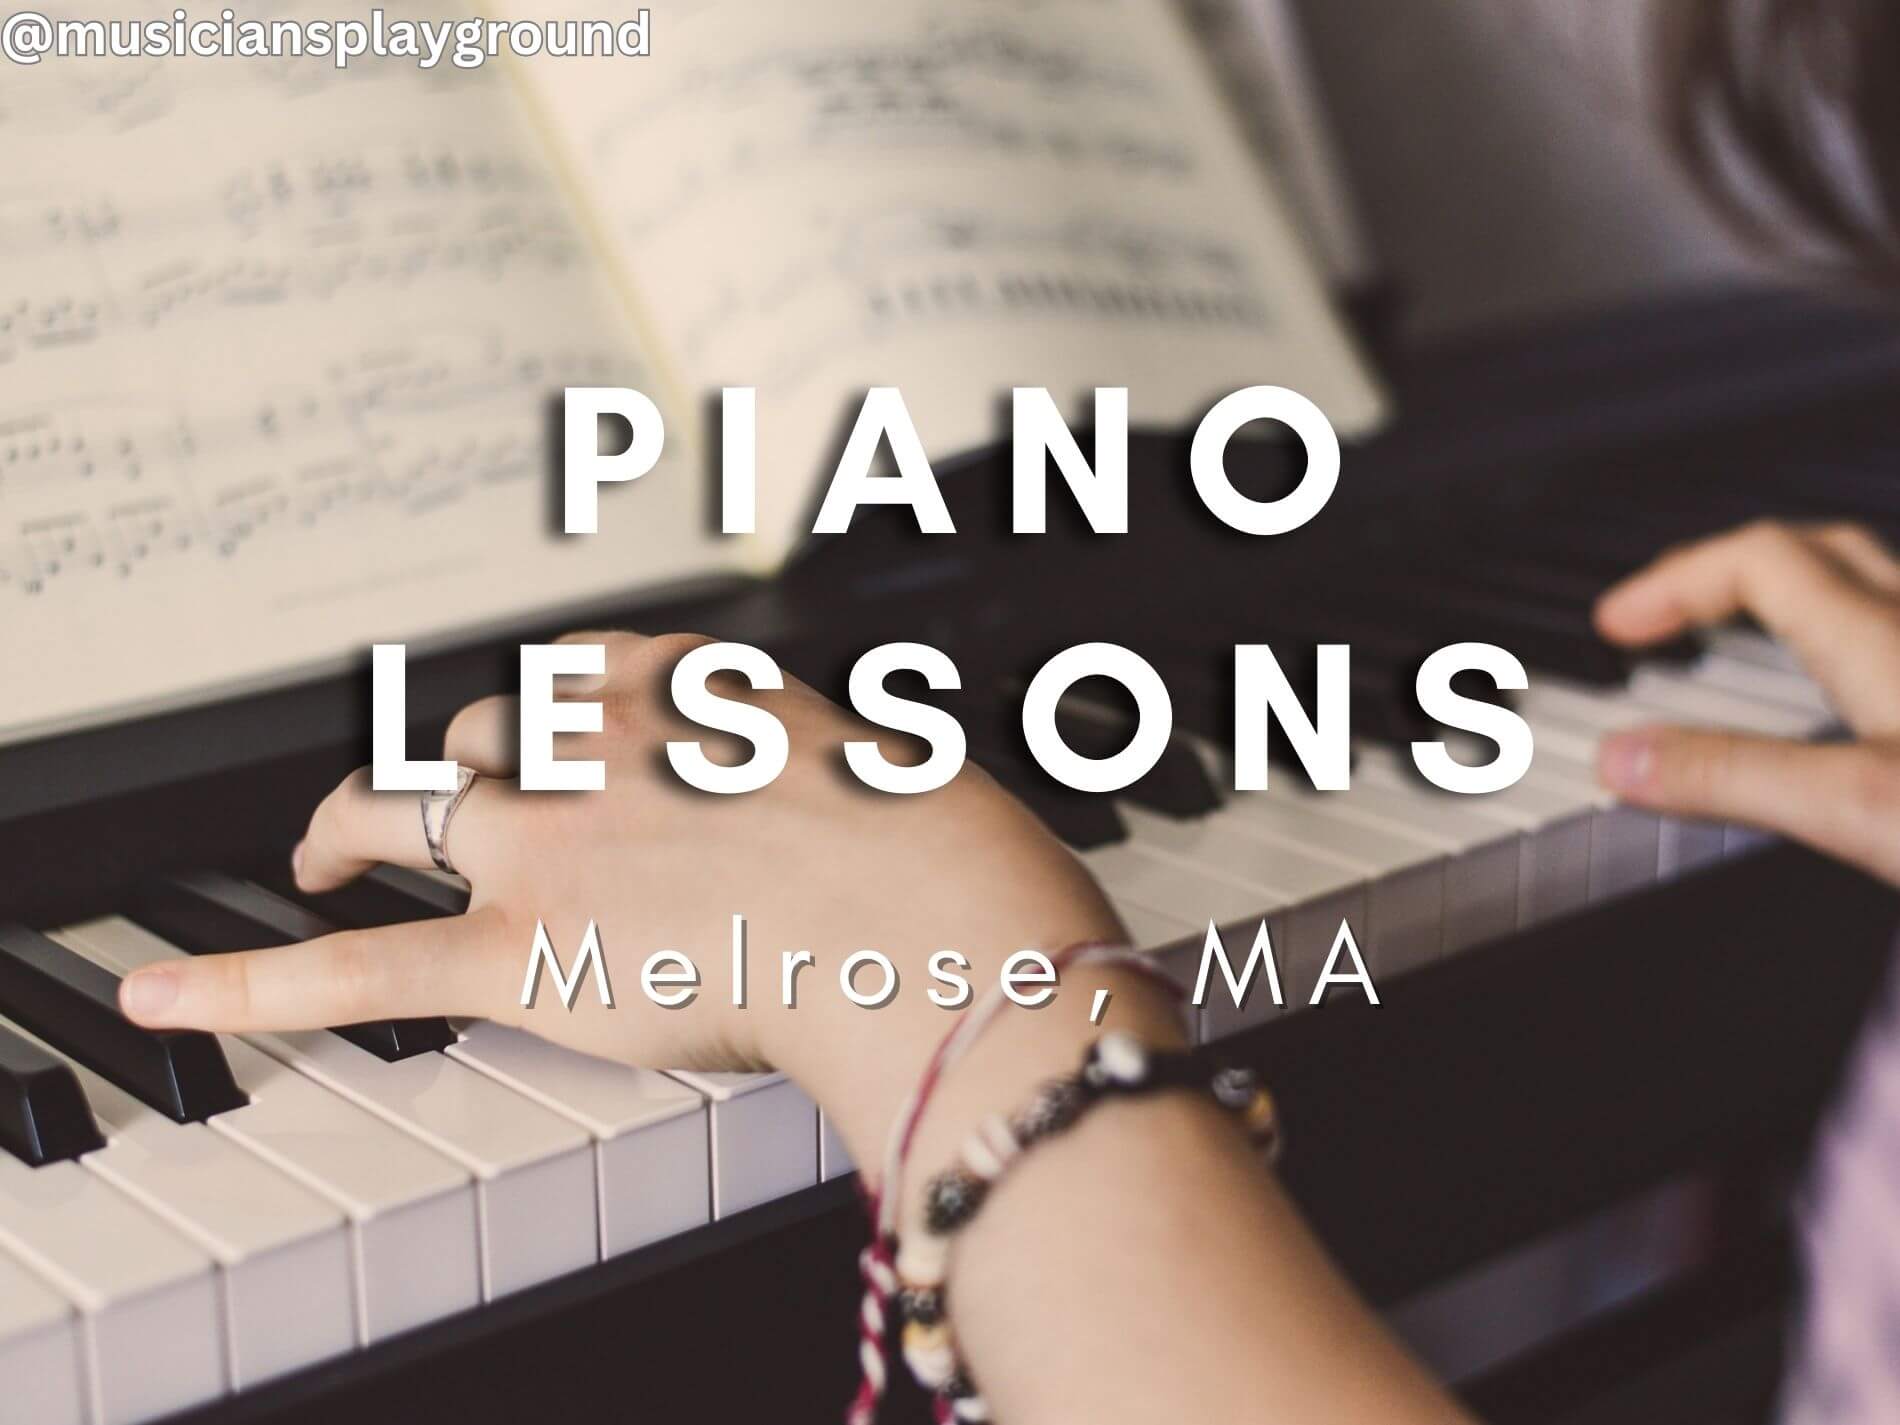 Piano Lessons in Melrose, Massachusetts: Practice Lessons, Music Education, Technique, Repertoire, and Practice Tips